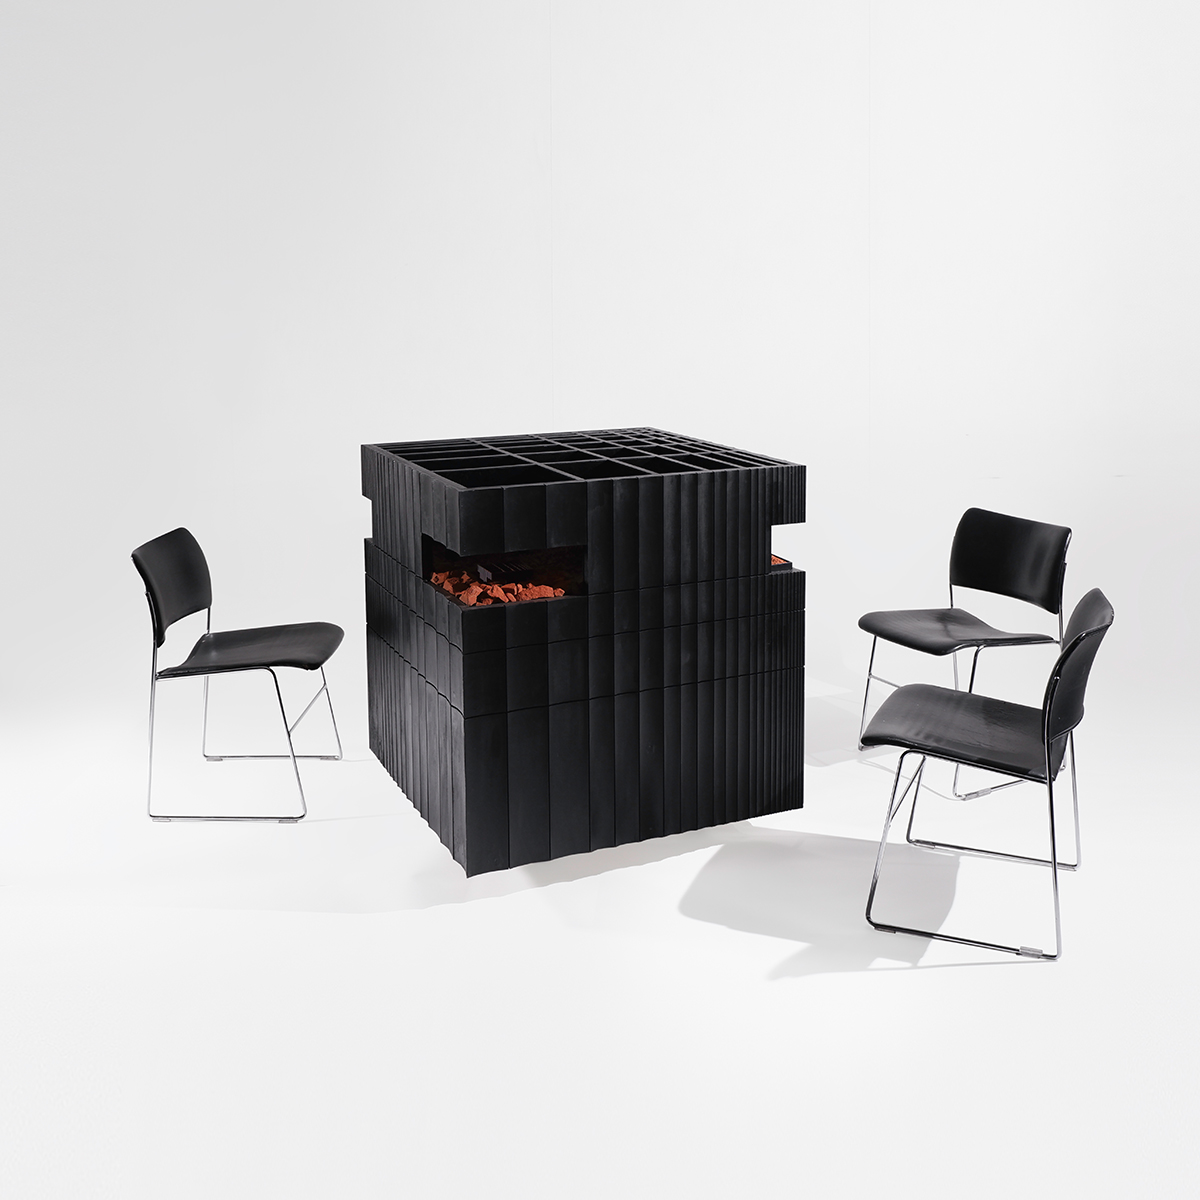 Image of model as a table with chairs surrounding it